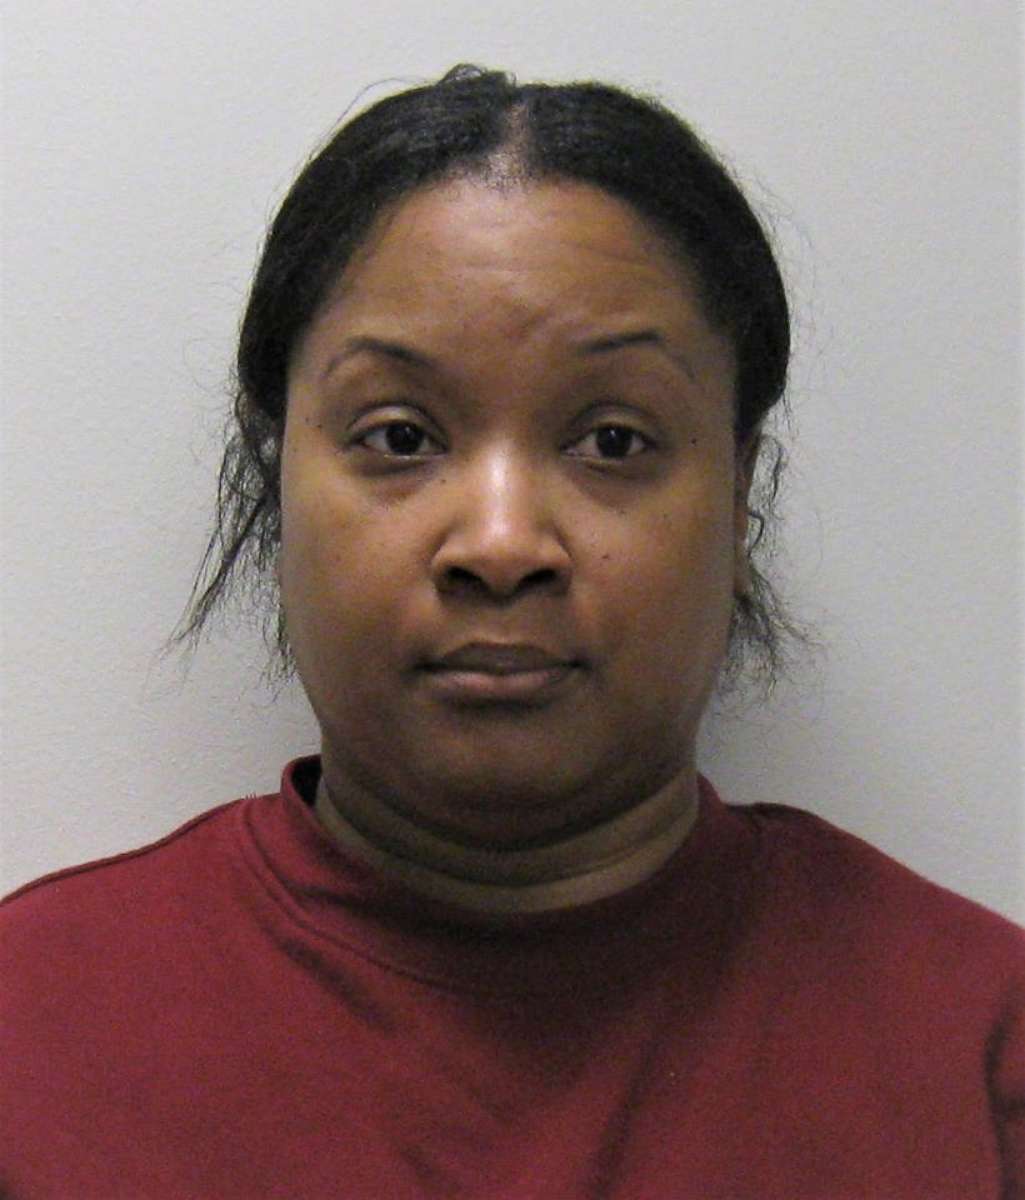 PHOTO: Taisha Smith-DeJoseph of Willingboro, New Jersey worked as the financial secretary of her church has been charged with embezzling more than half a million dollars from it to pay for thousands of online purchases.